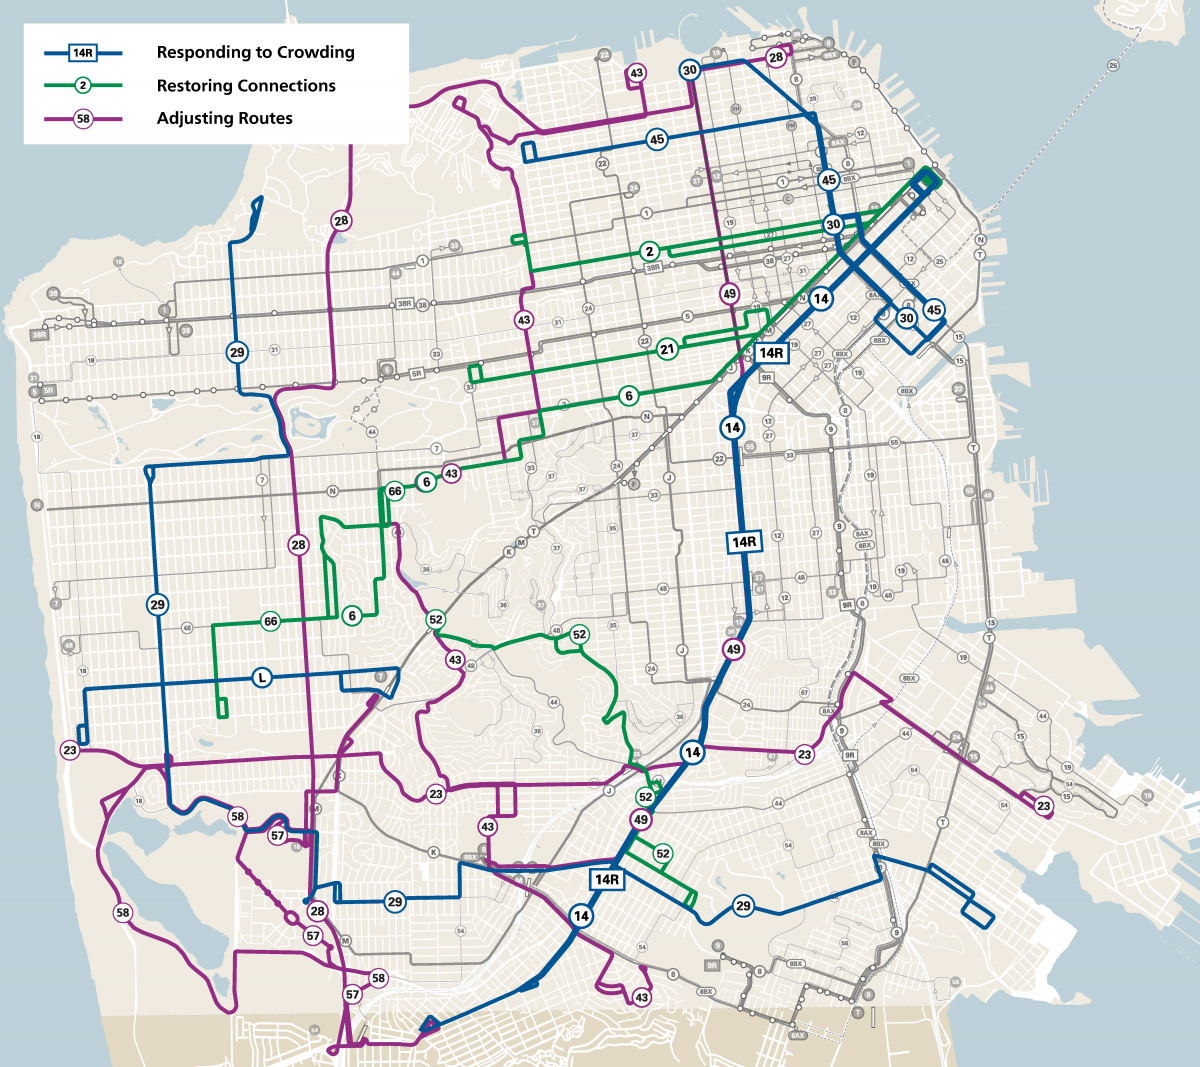 Map showing the routes that are part of the July 2022 service changes. Routes responding to crowding: 14R Mission Rapid, 29 Sunset, 45 Union-Stockton, 58 Lake Merced, L Bus. Routes that are restoring connections: 2 Sutter, 6 Parnassus, 21 Hayes. Routes being adjusted or restored: 23 Monterey, 28 19th Avenue, 43 Masonic, 49 Van Ness, 52 Excelsior, 57 Parkmerced, 58 Lake Merced, 66 Quintara.